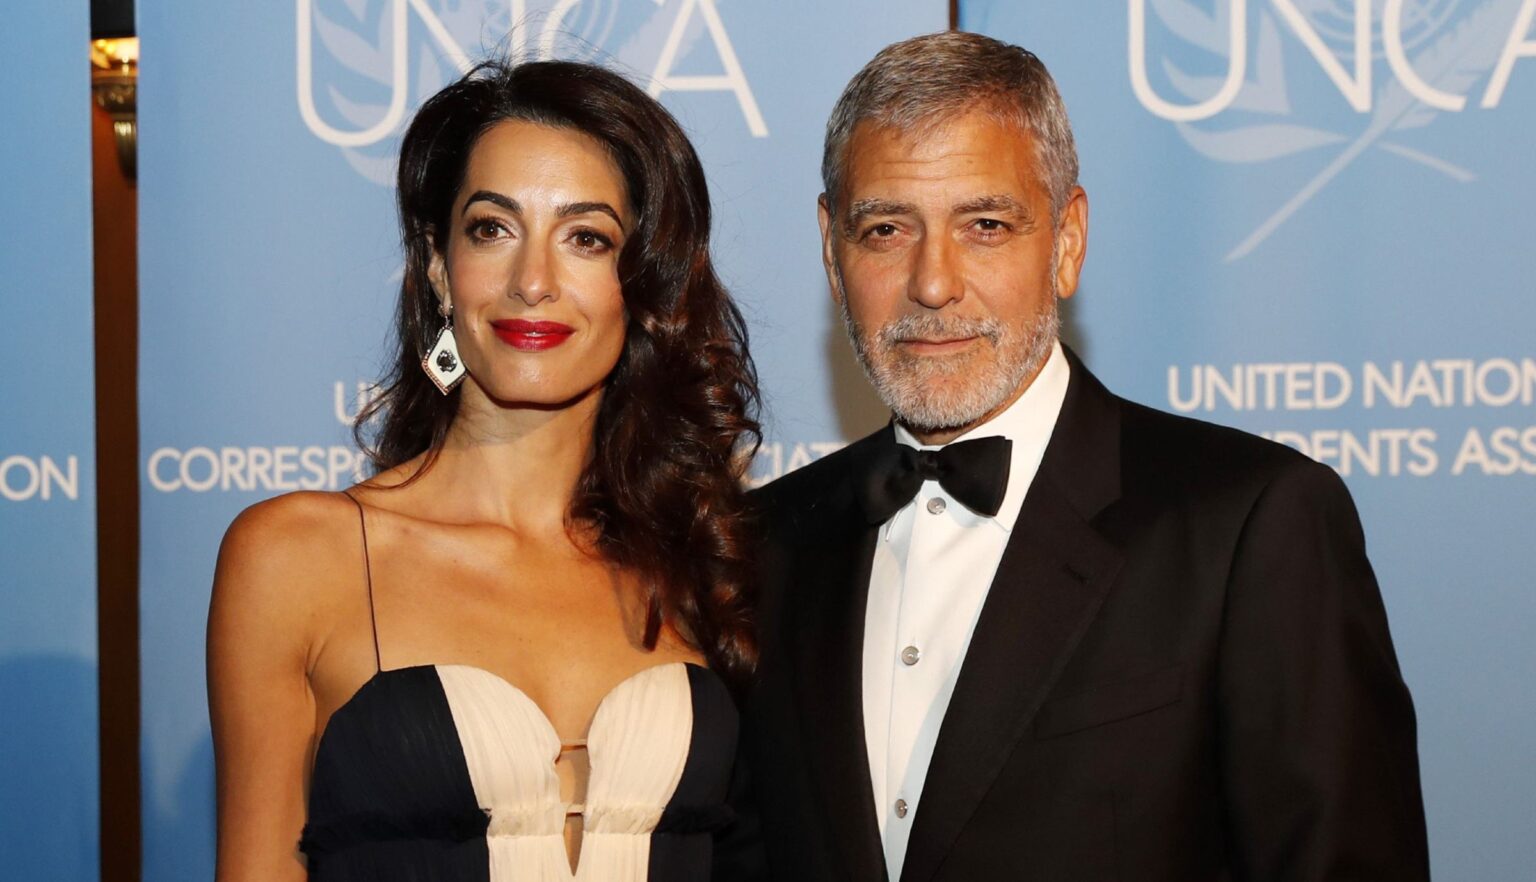 George and Amal Clooney haven't been on the best terms for a while. Will COVID-19 finally push them into divorce?